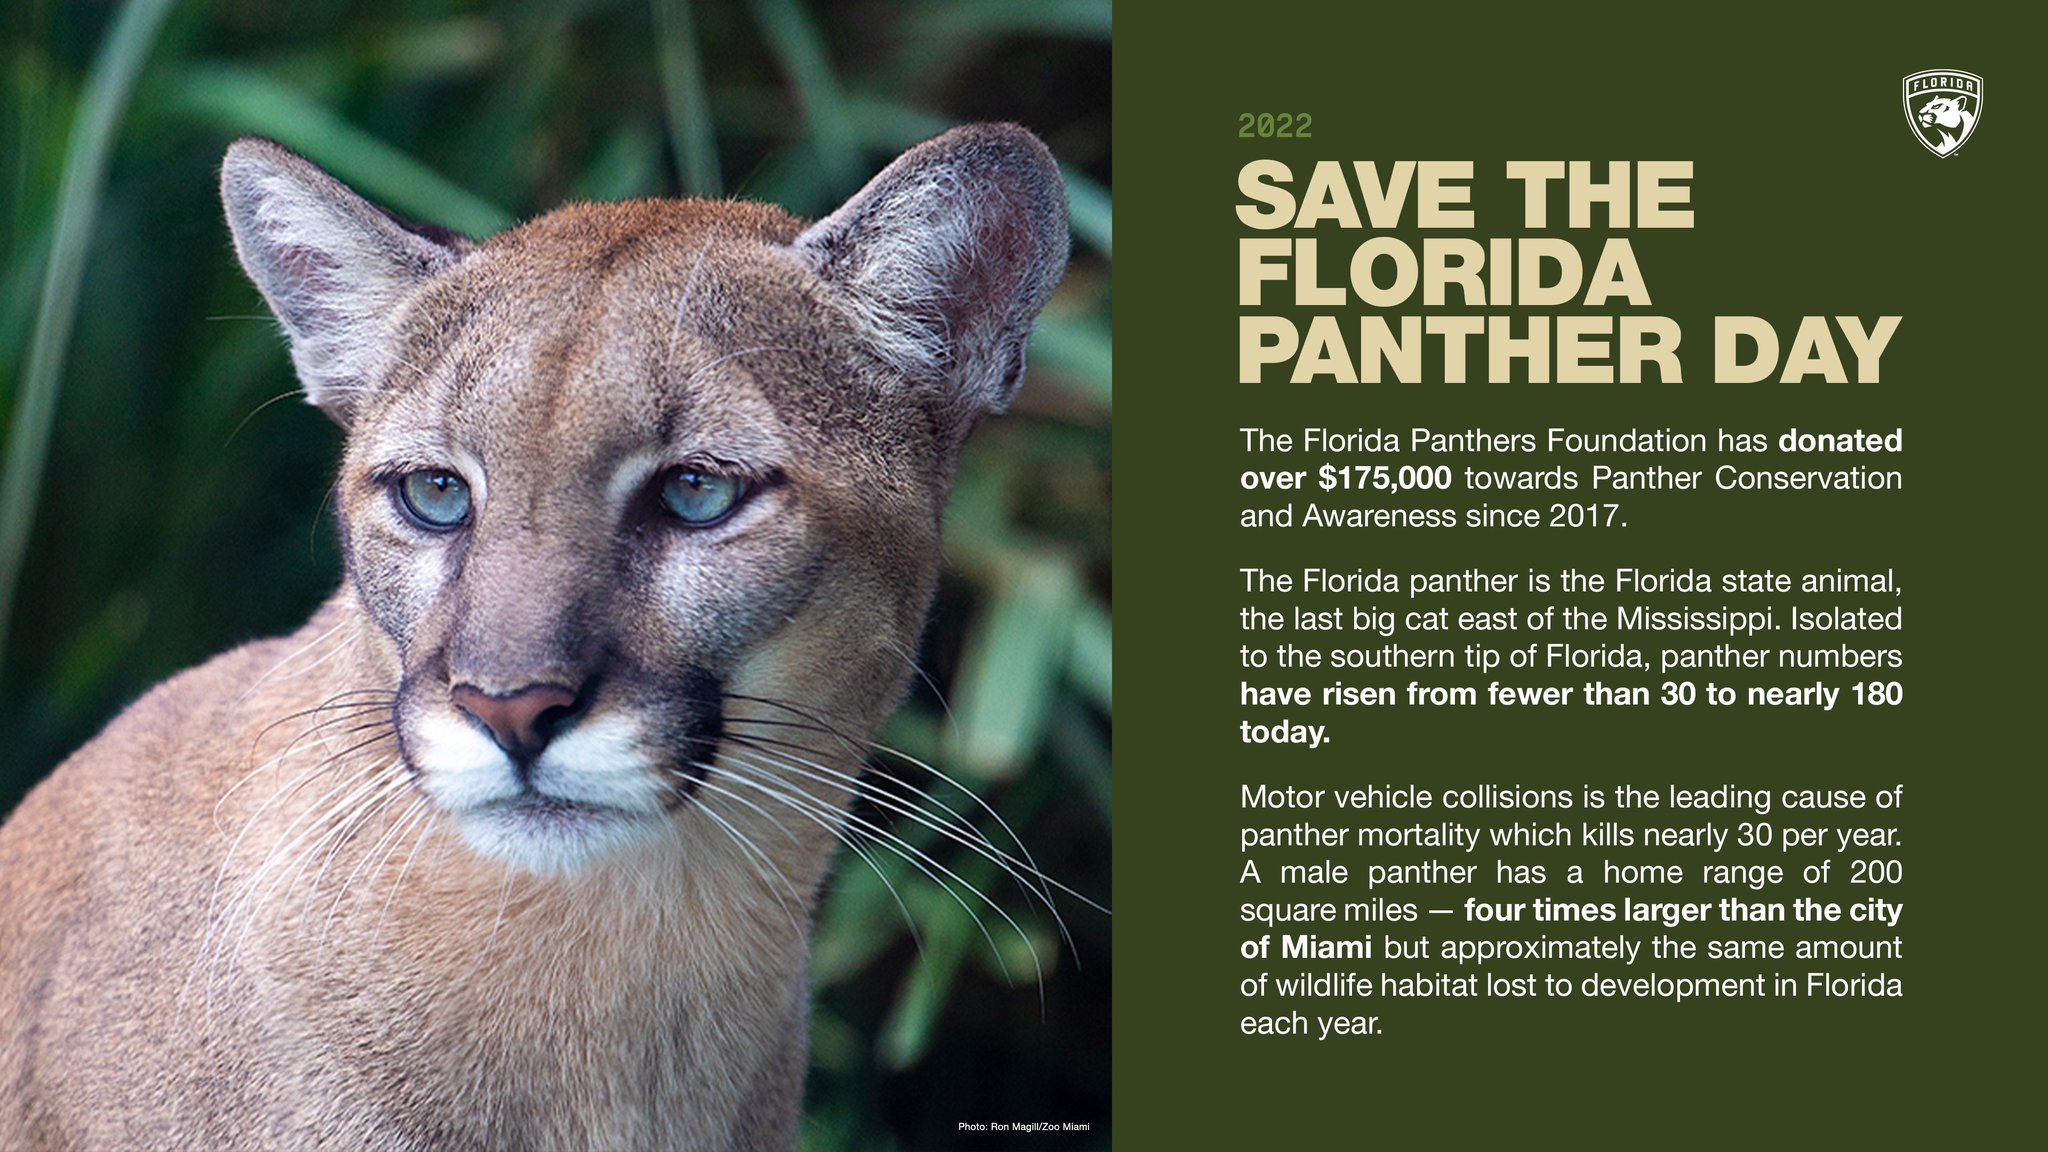 New Hope for Florida Panthers